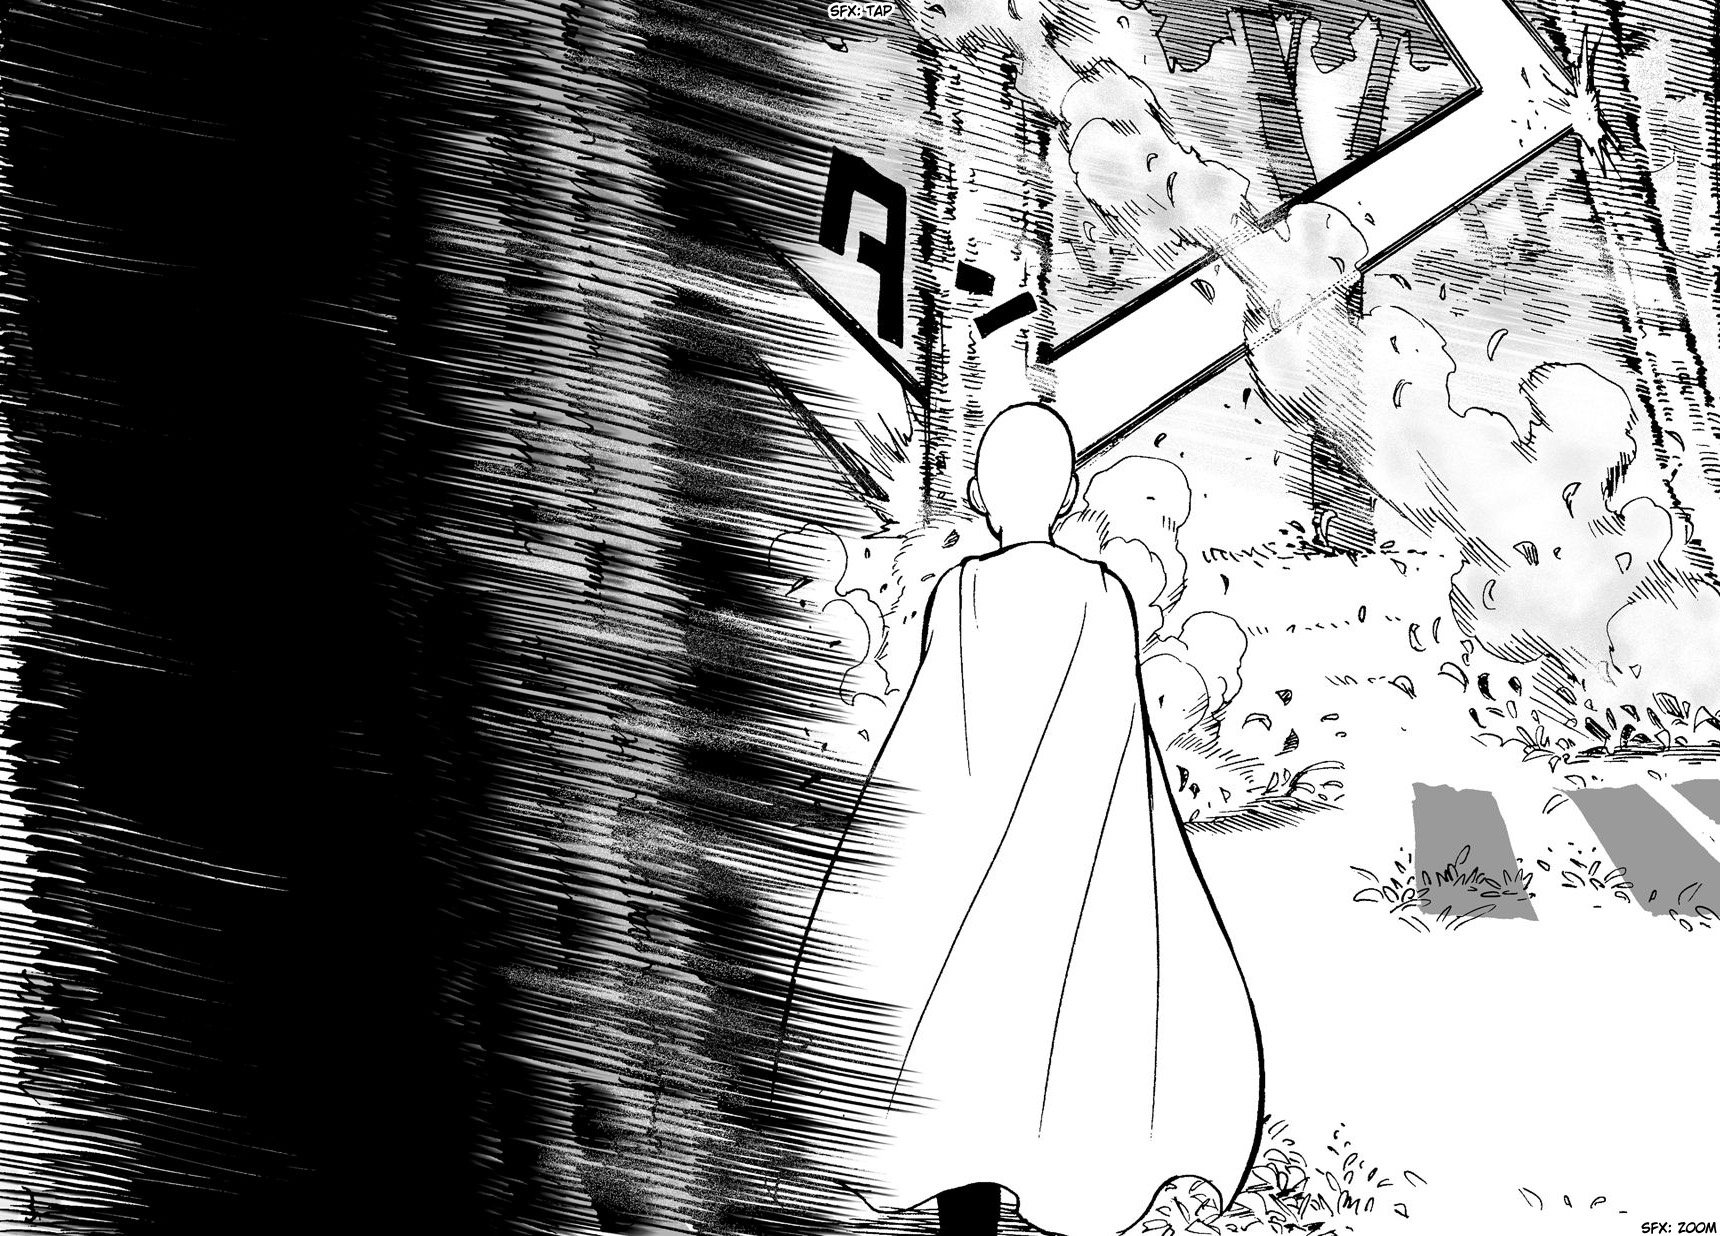 One Punch Man, Chapter 15 - Fun and Work image 04